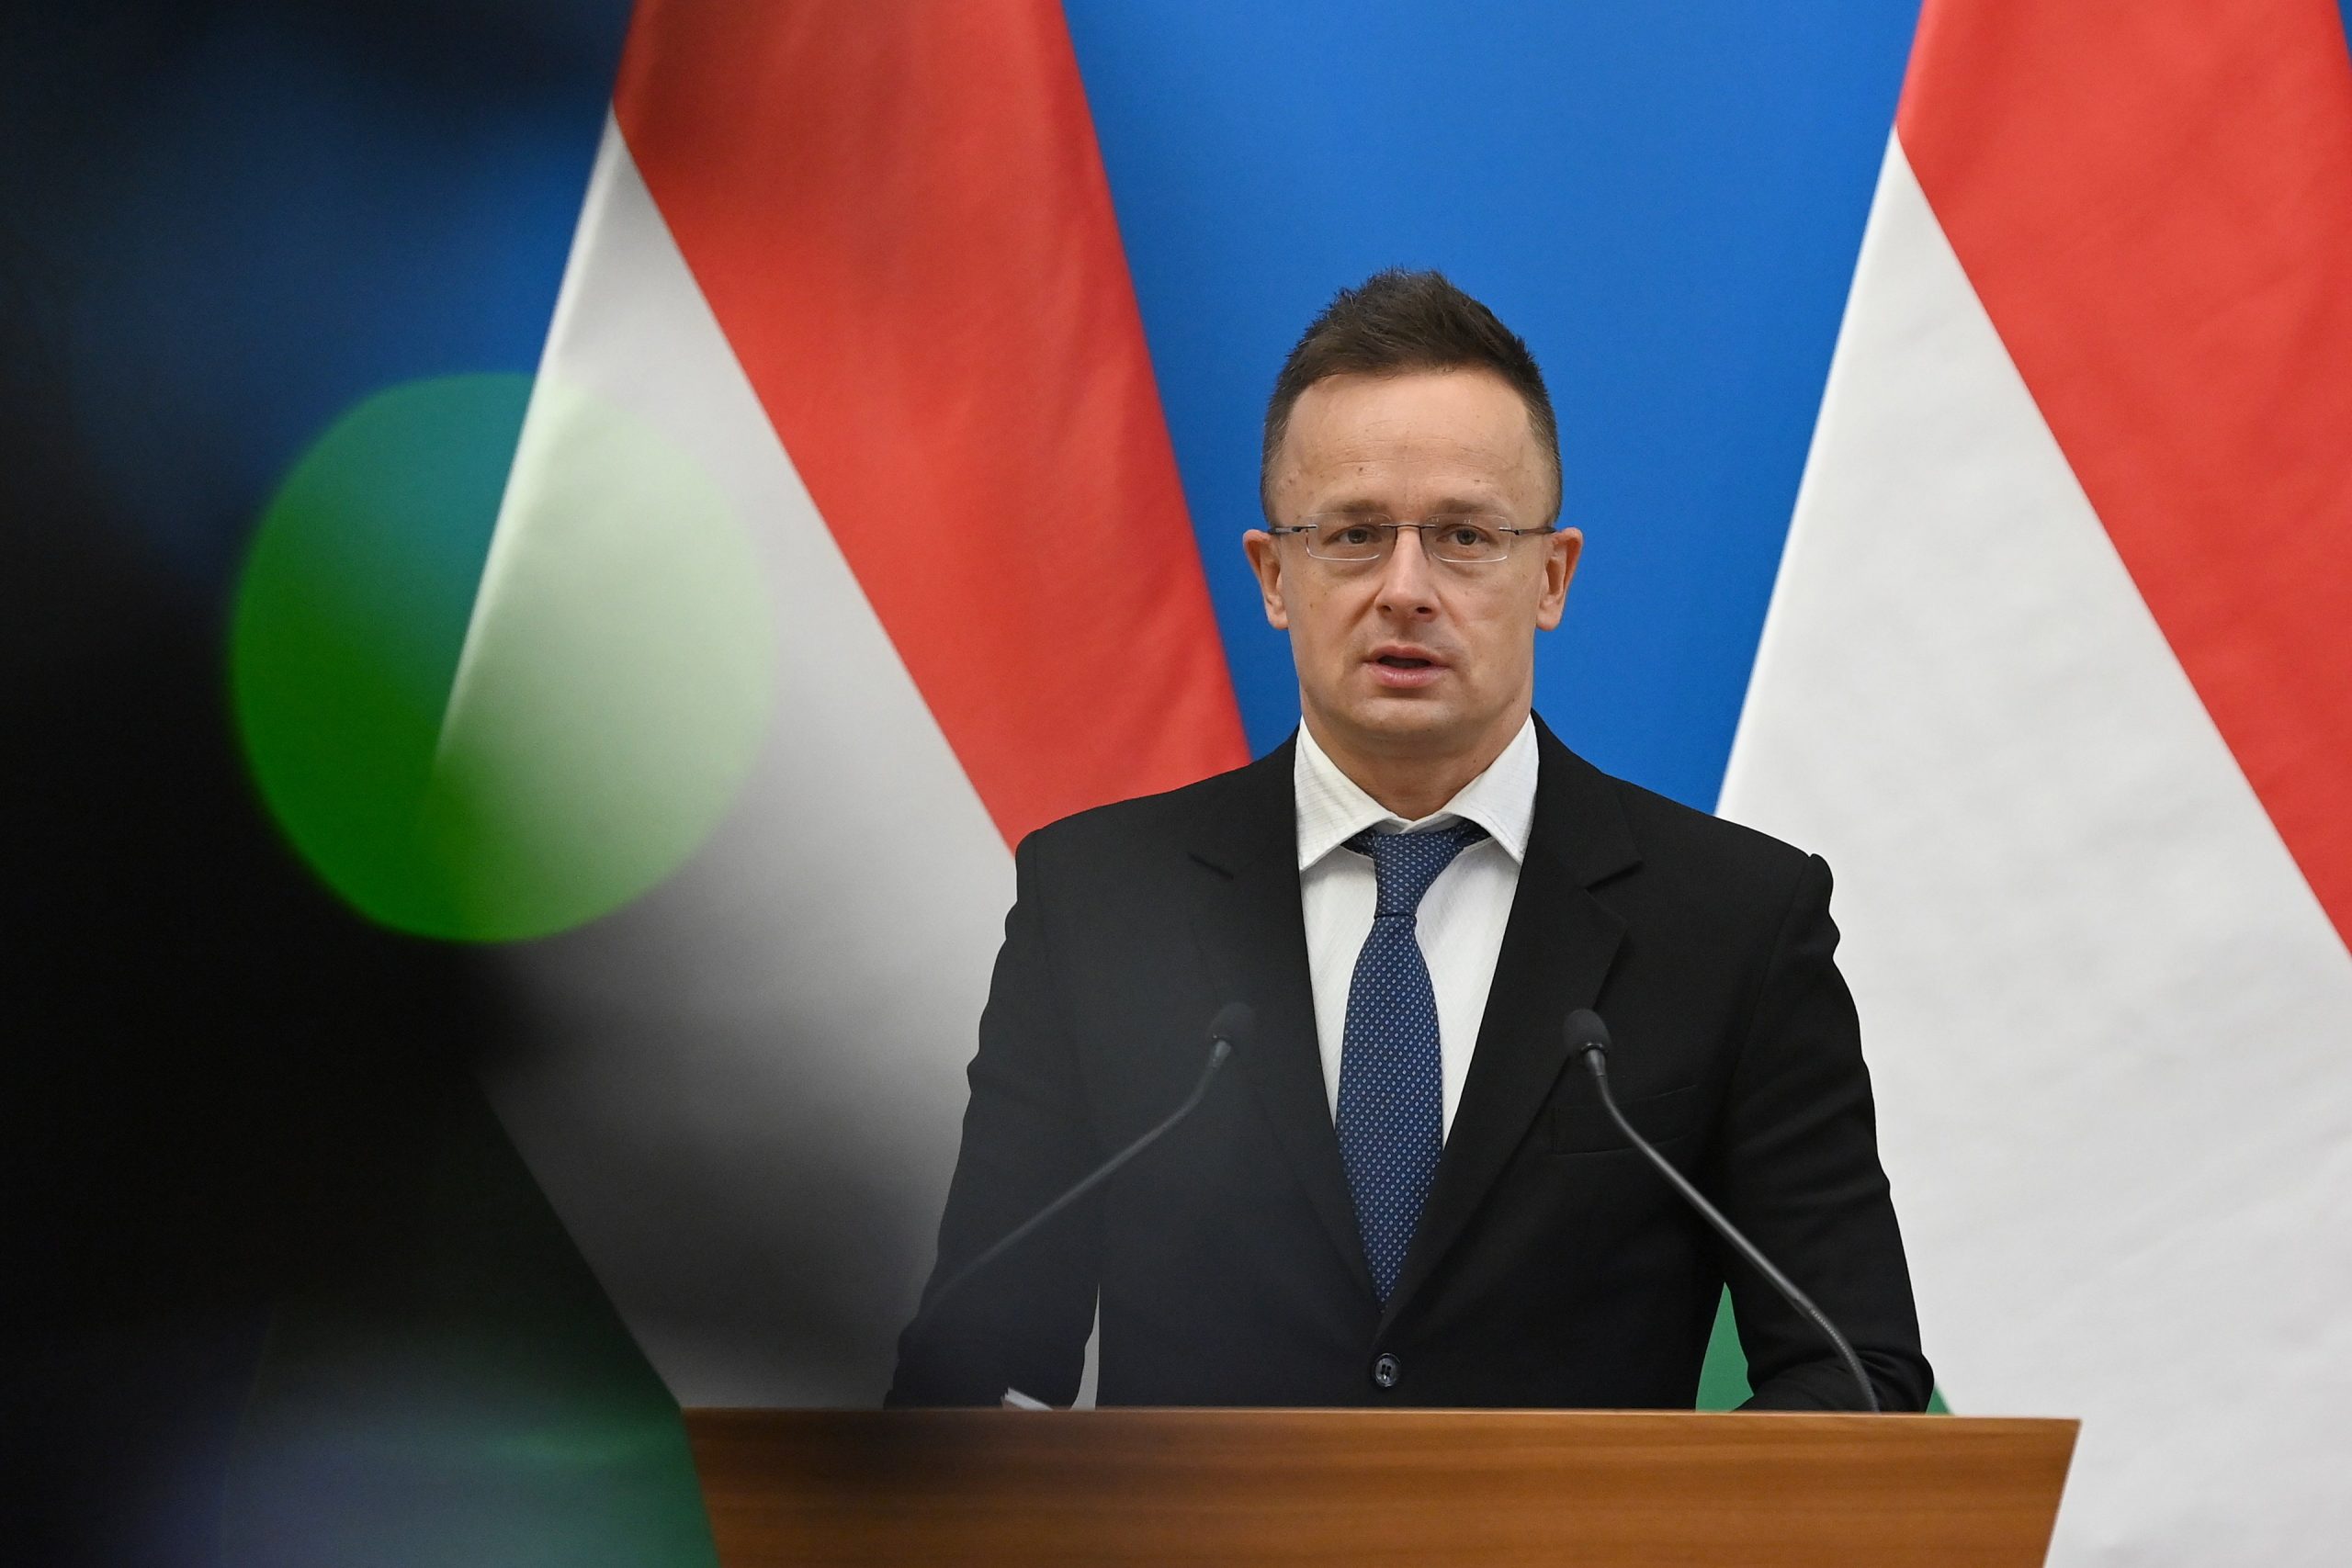 FM Szijjártó on Ukraine Conflict: If Kyiv Does Not Change Anti-Minority Policies, Hungary Cannot Offer Much Help